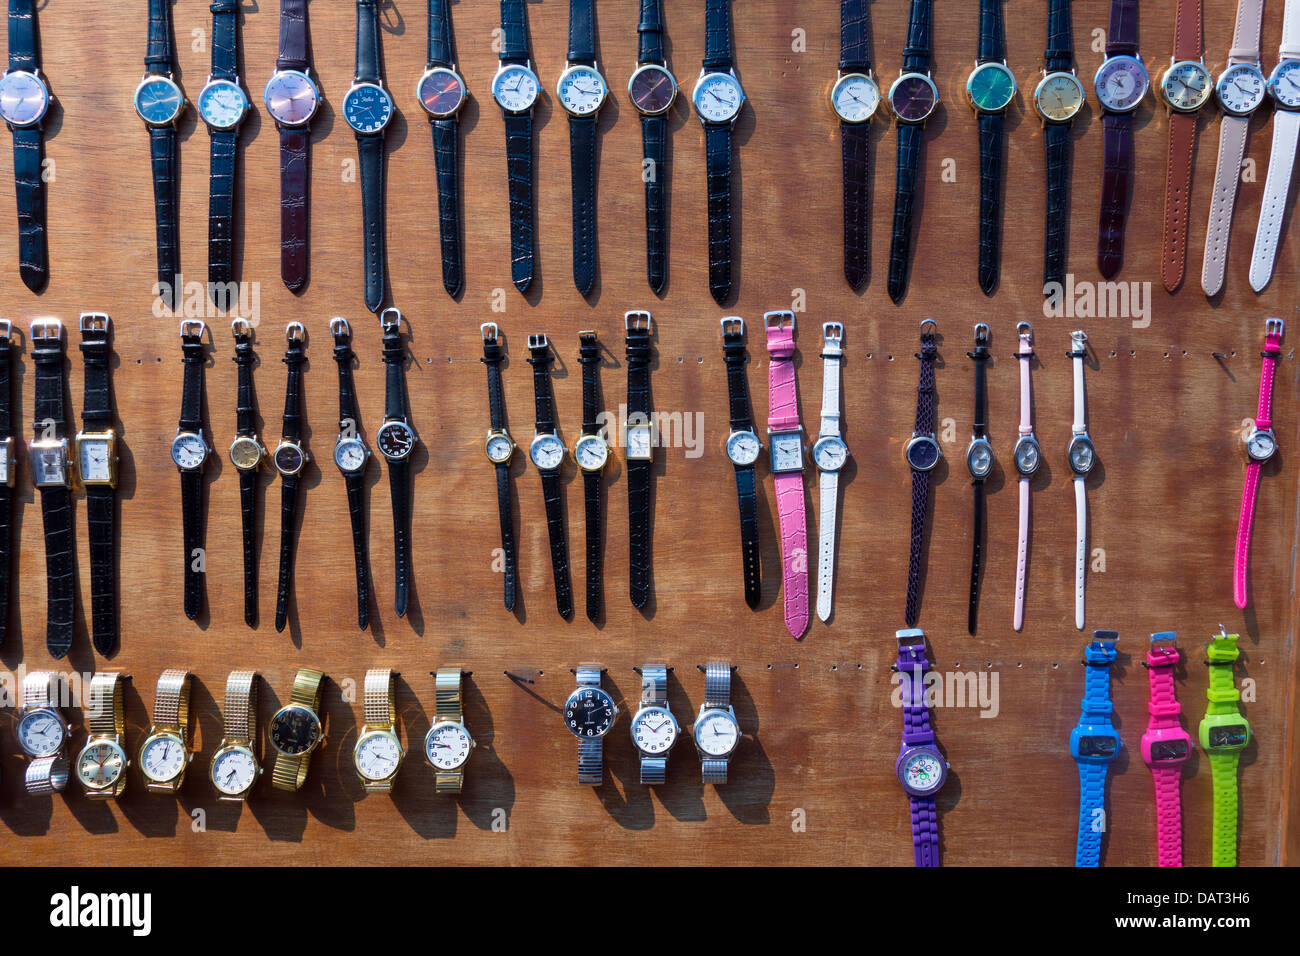 Watches hung on board for sale Stock Photo